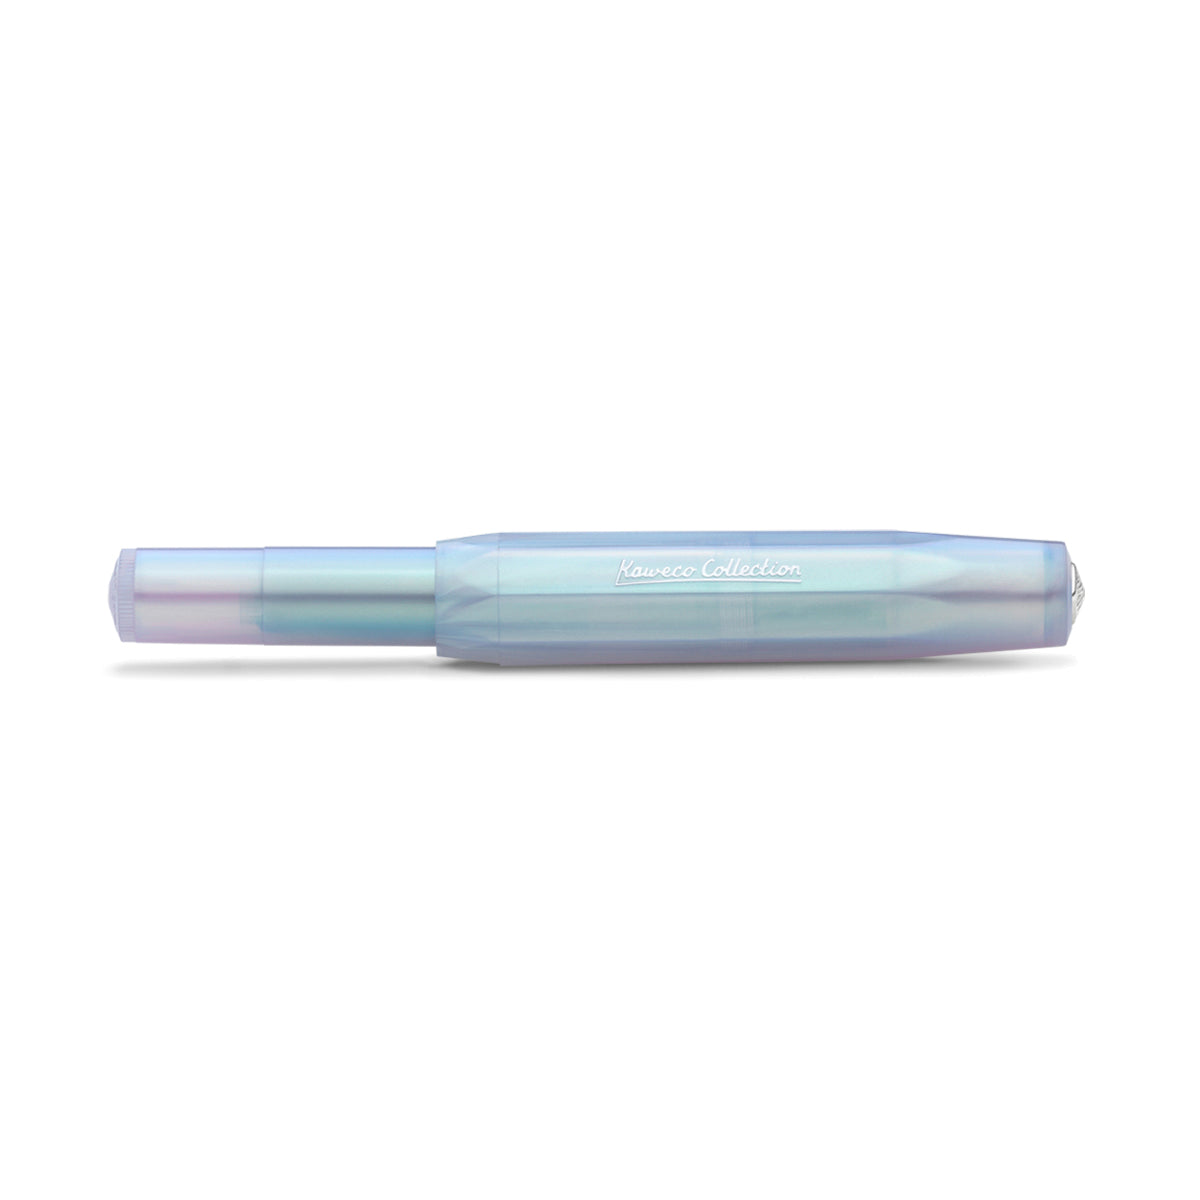 Translucent pen in a blending hues of blue, green, and purple, with the inscription 'Kaweco Collection,' closed and resting on a white background.